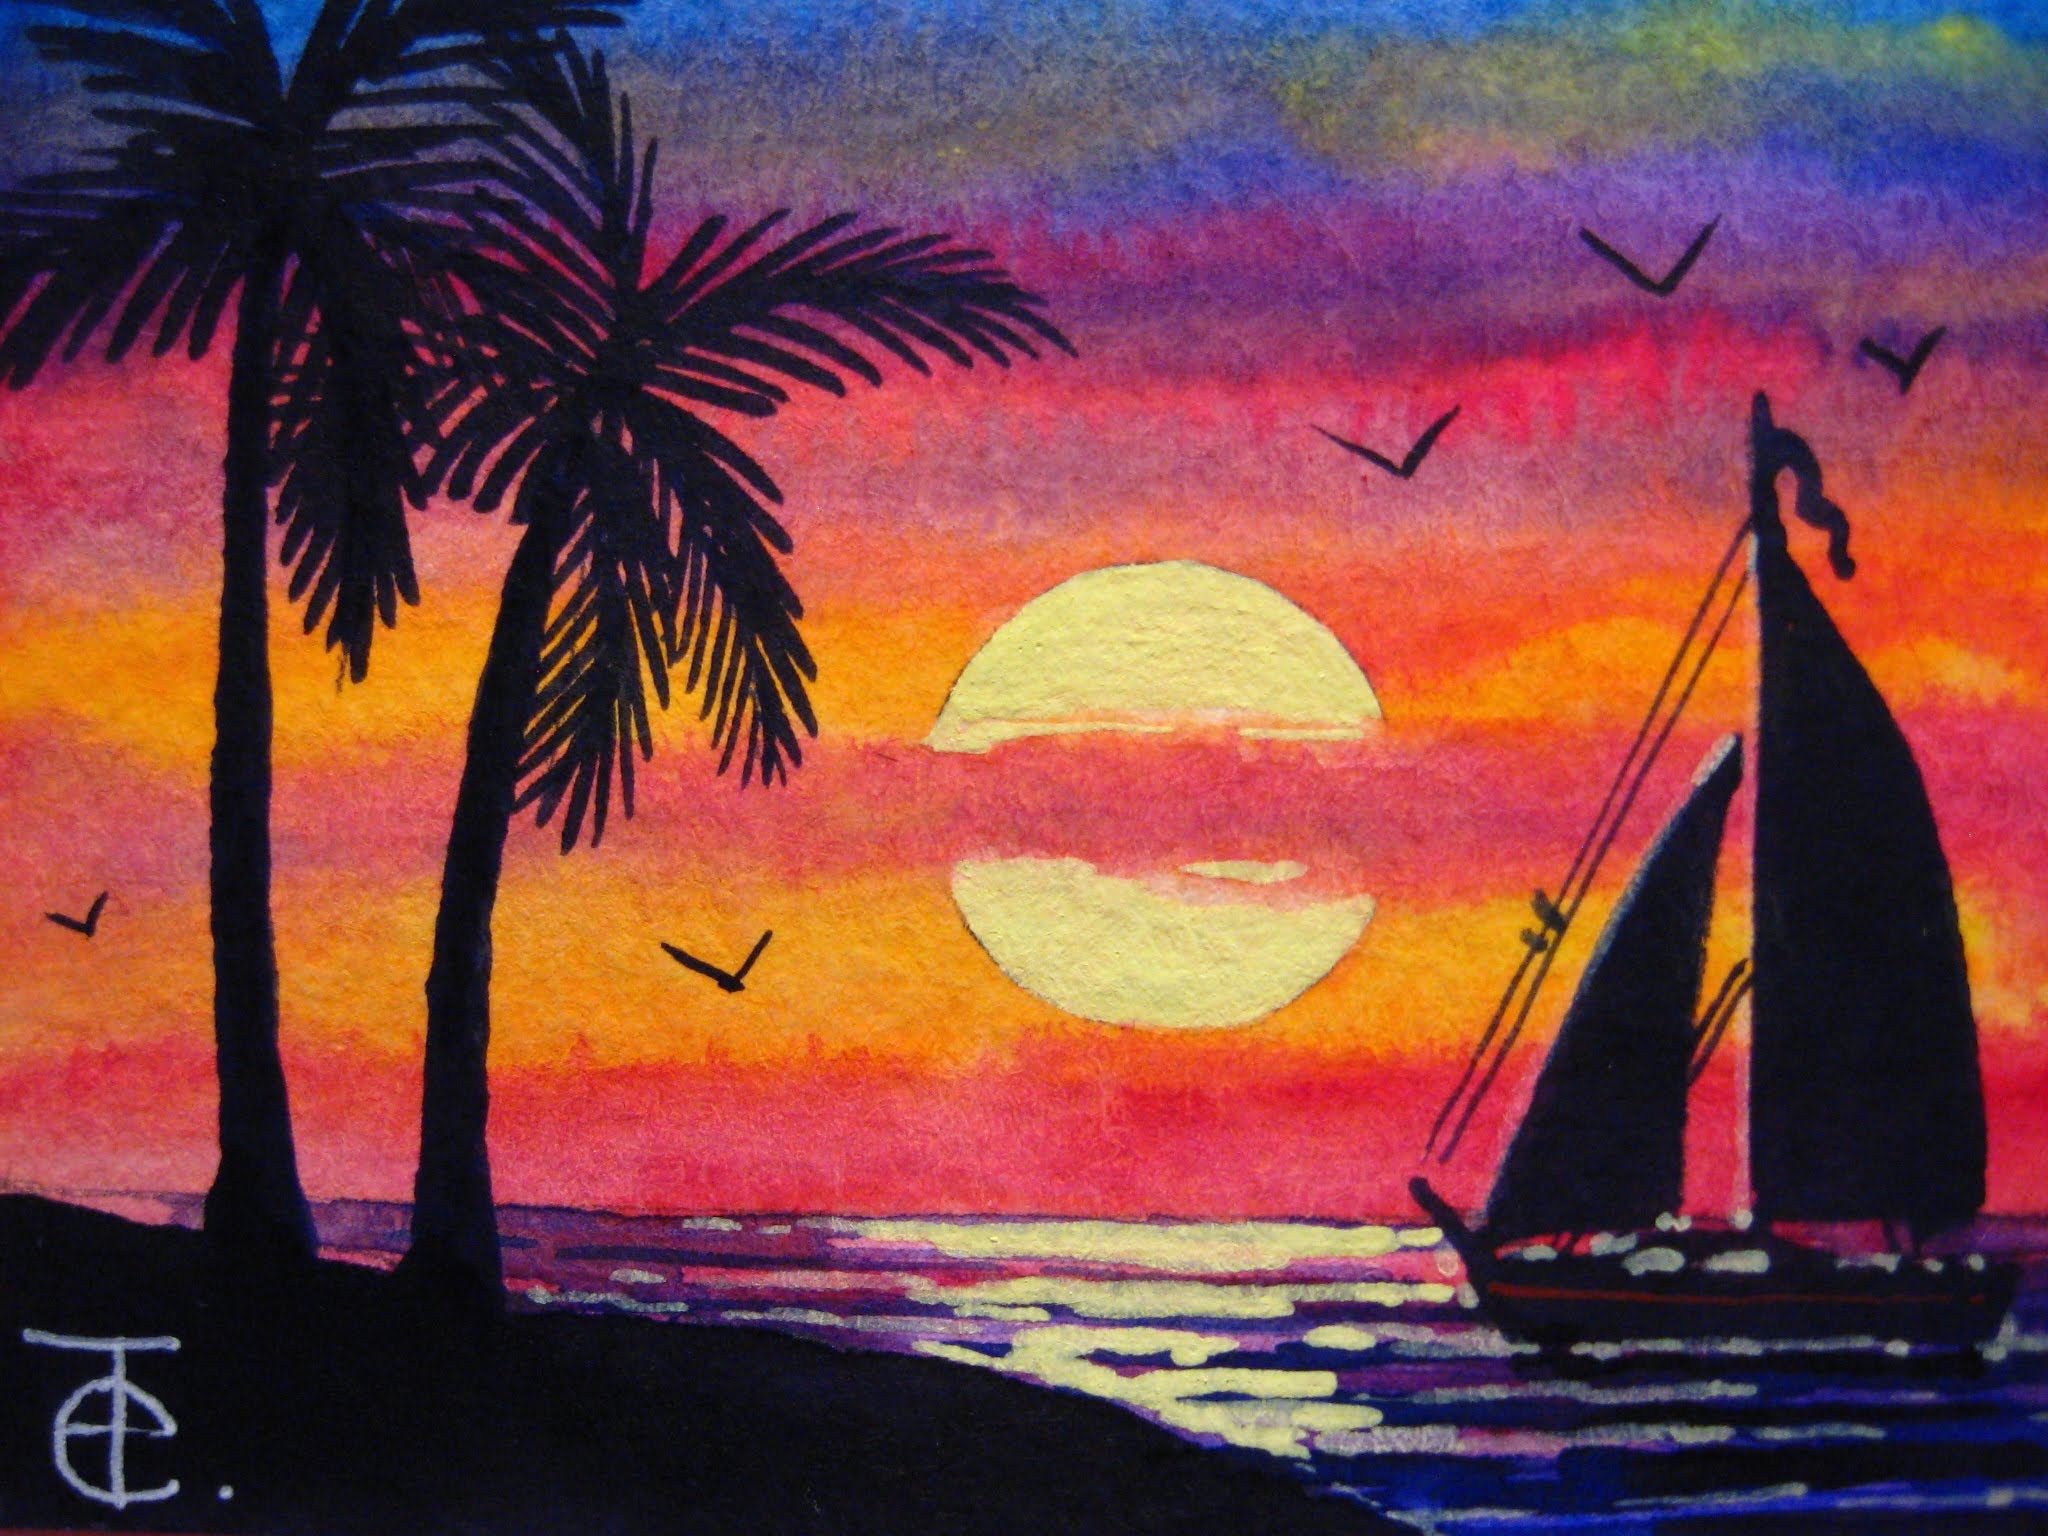 Sunset Over Ocean Painting.